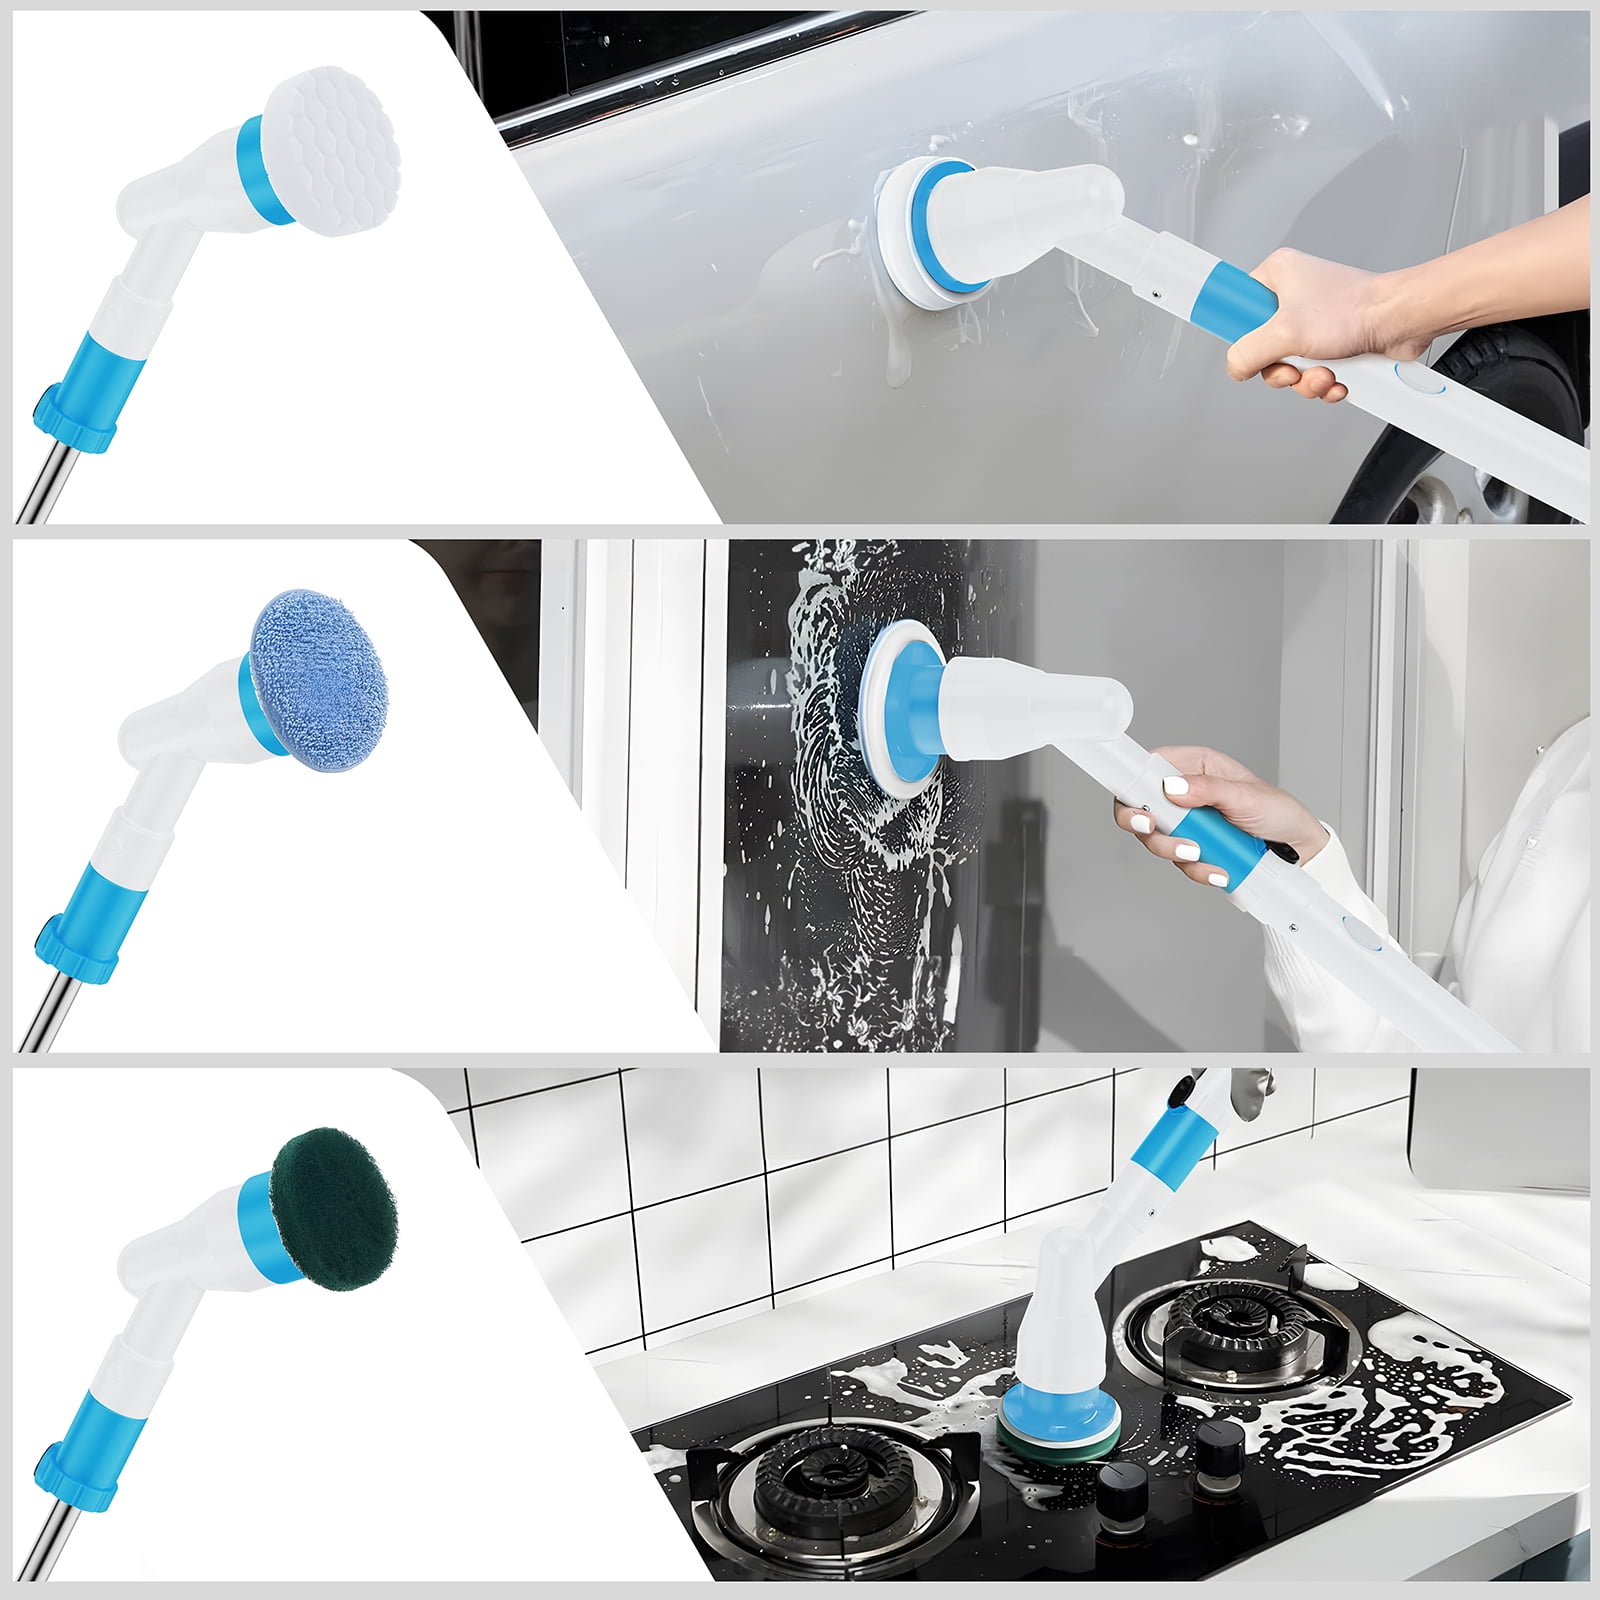 Innorca Electric Spin Scrubber 2023 New Cordless Power Cleaning Brush with 7 Replacement Brush Heads, Shower Cleaning Brush with Extension Arm for